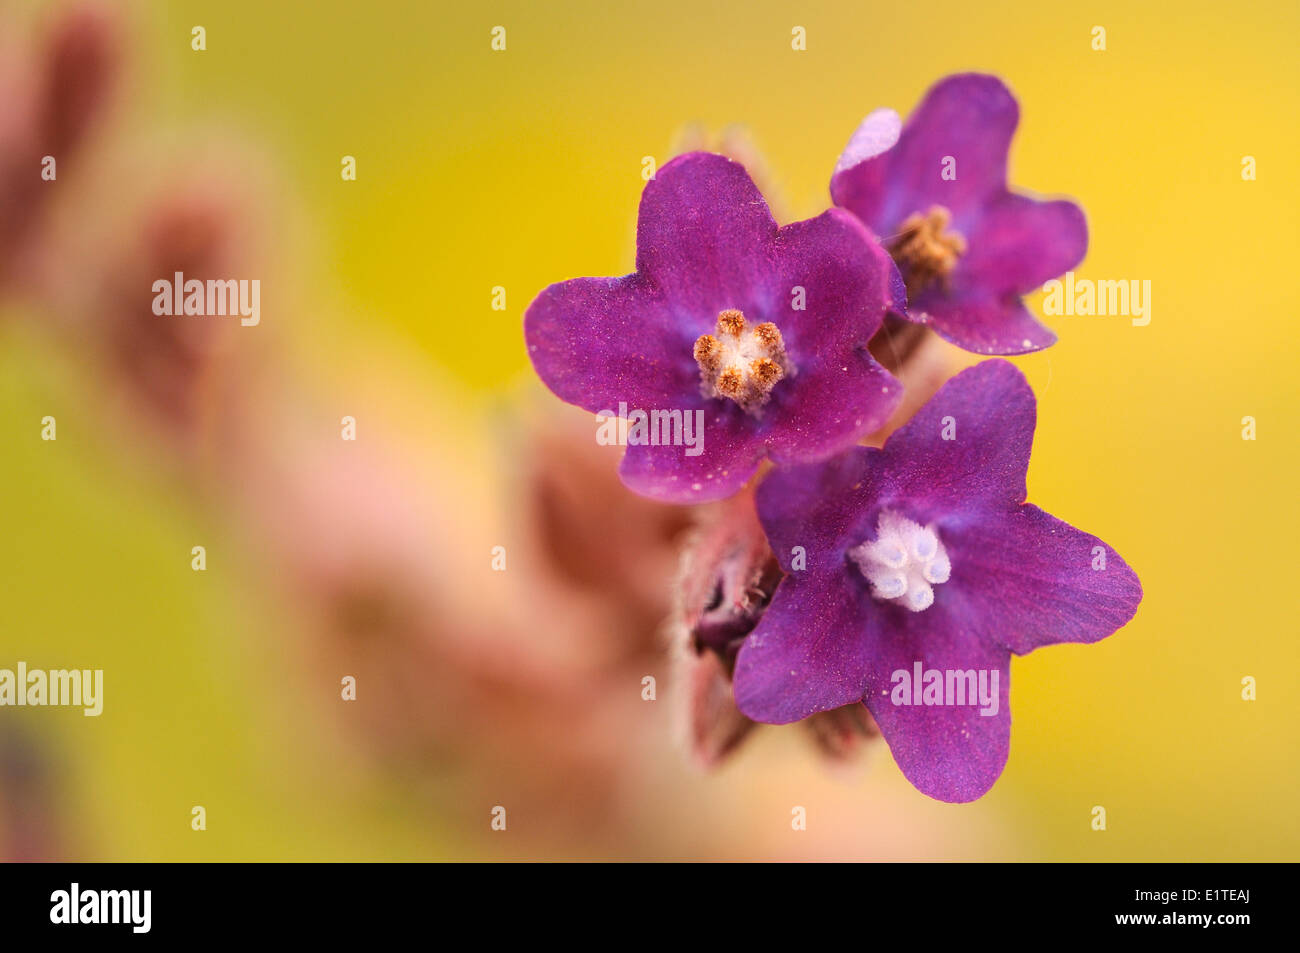 Purple flowers of Alkanet in close-up with yellow background Stock Photo